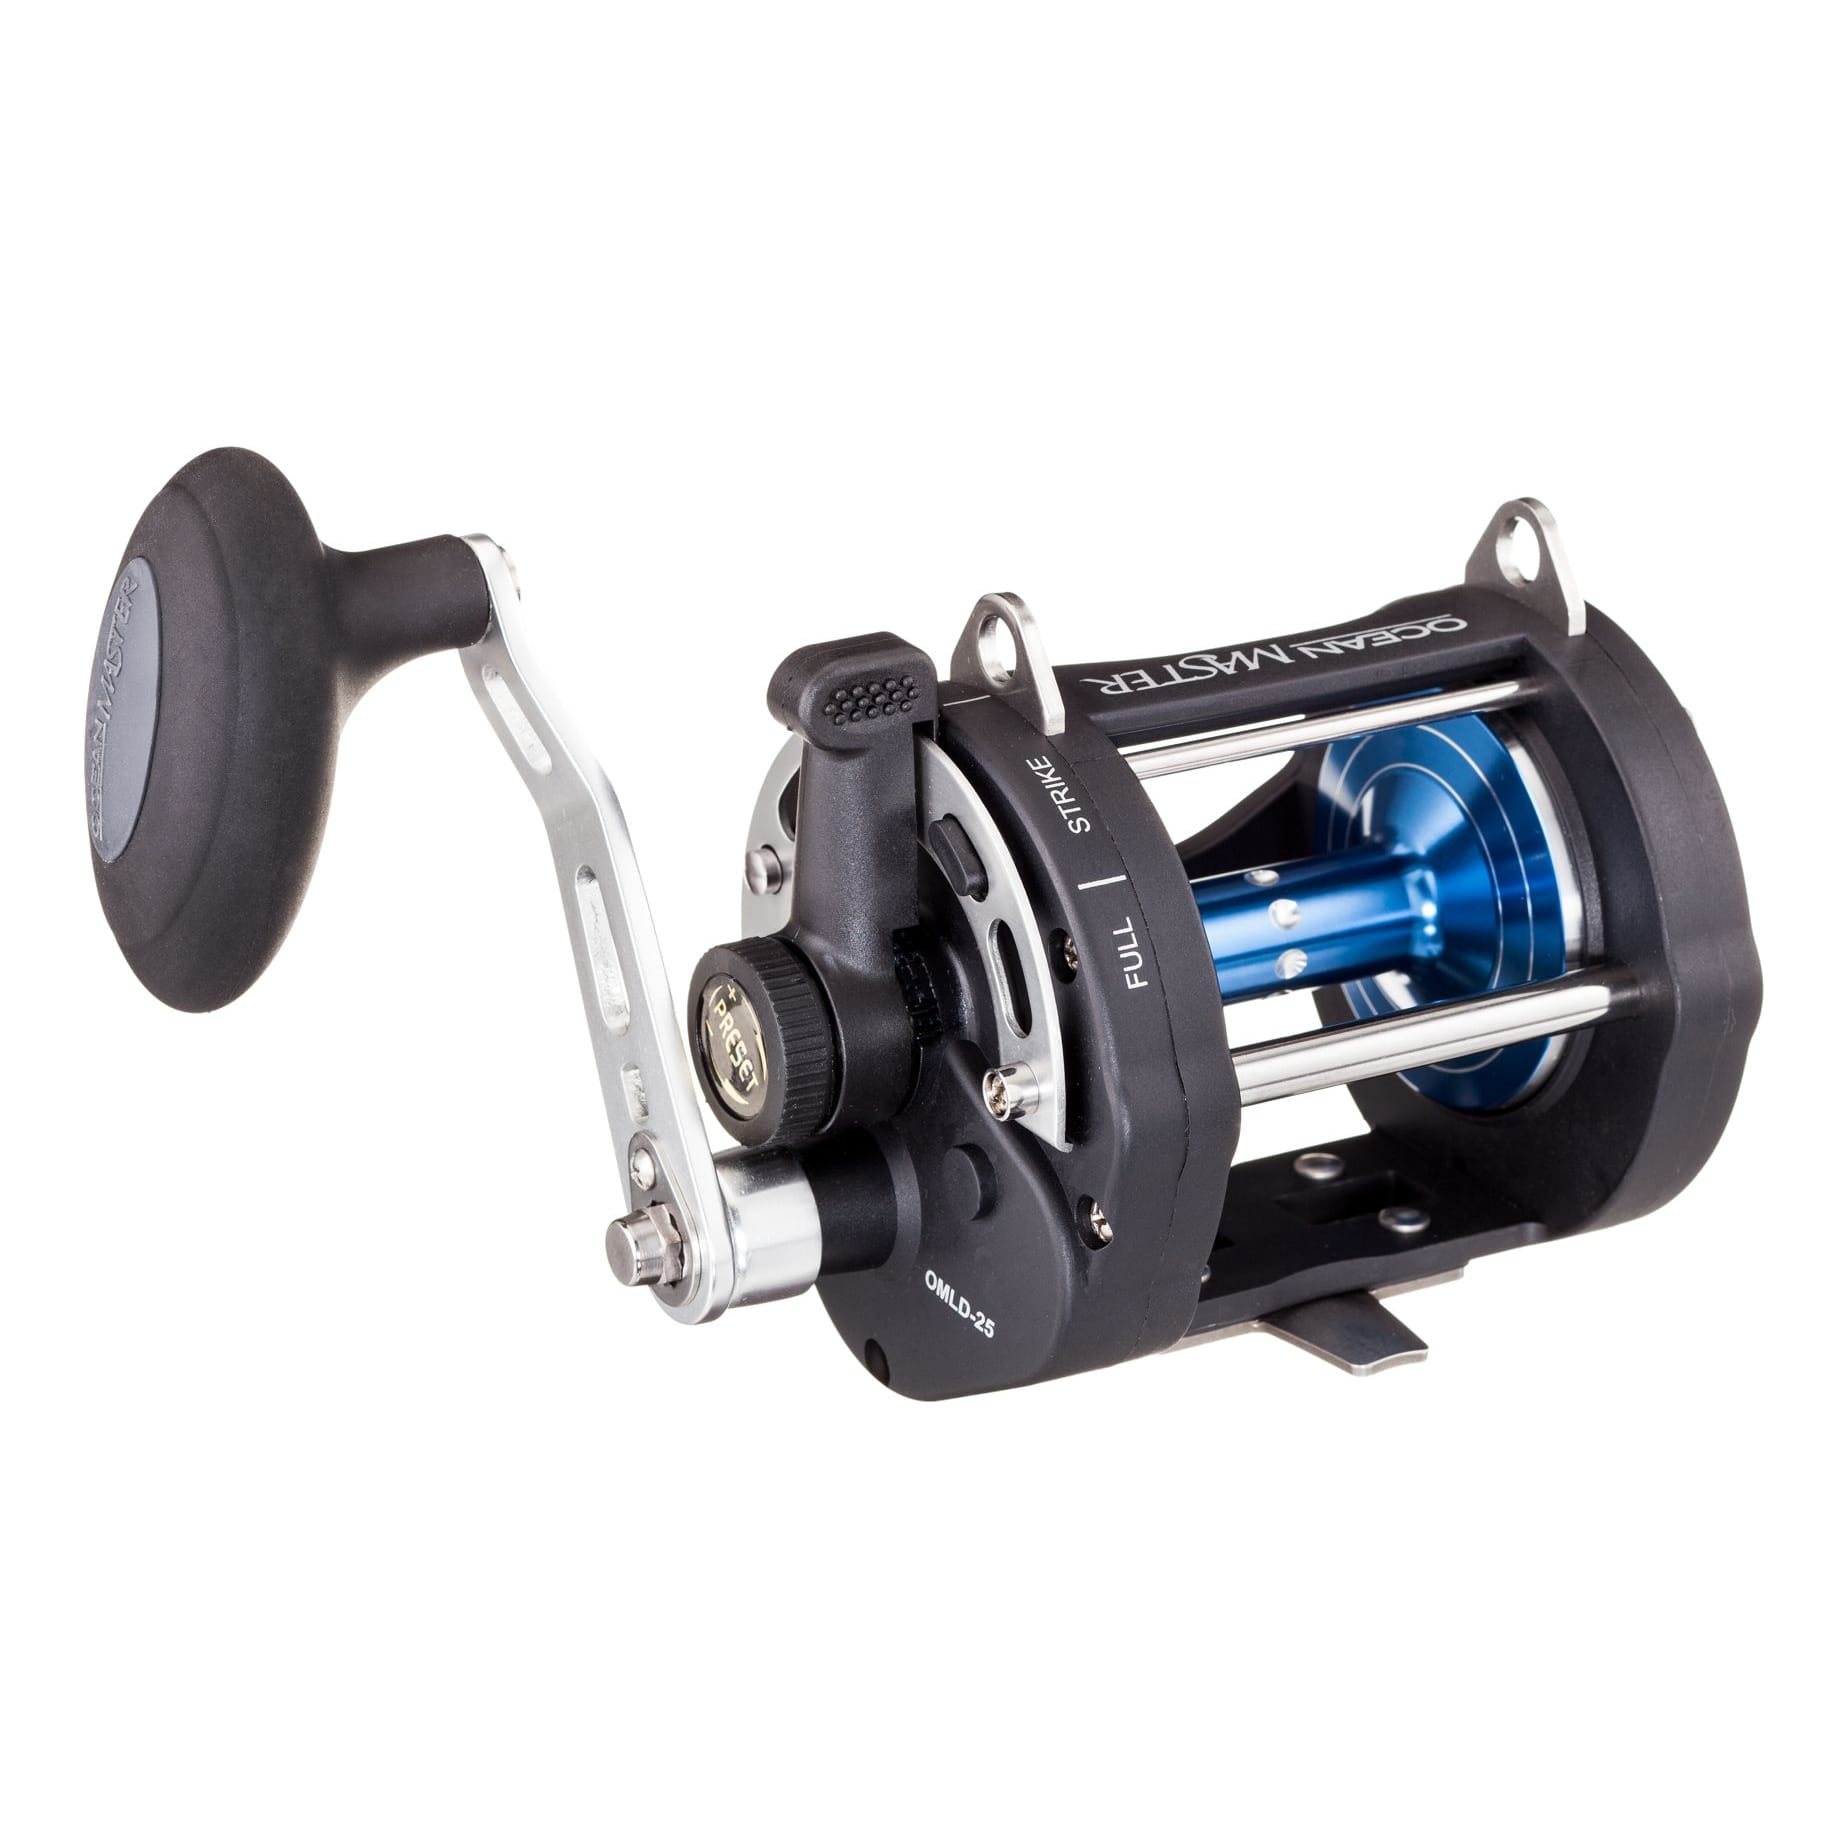 Penn Squall Level Wind Reel with Line Counter – Tall Tales Bait & Tackle